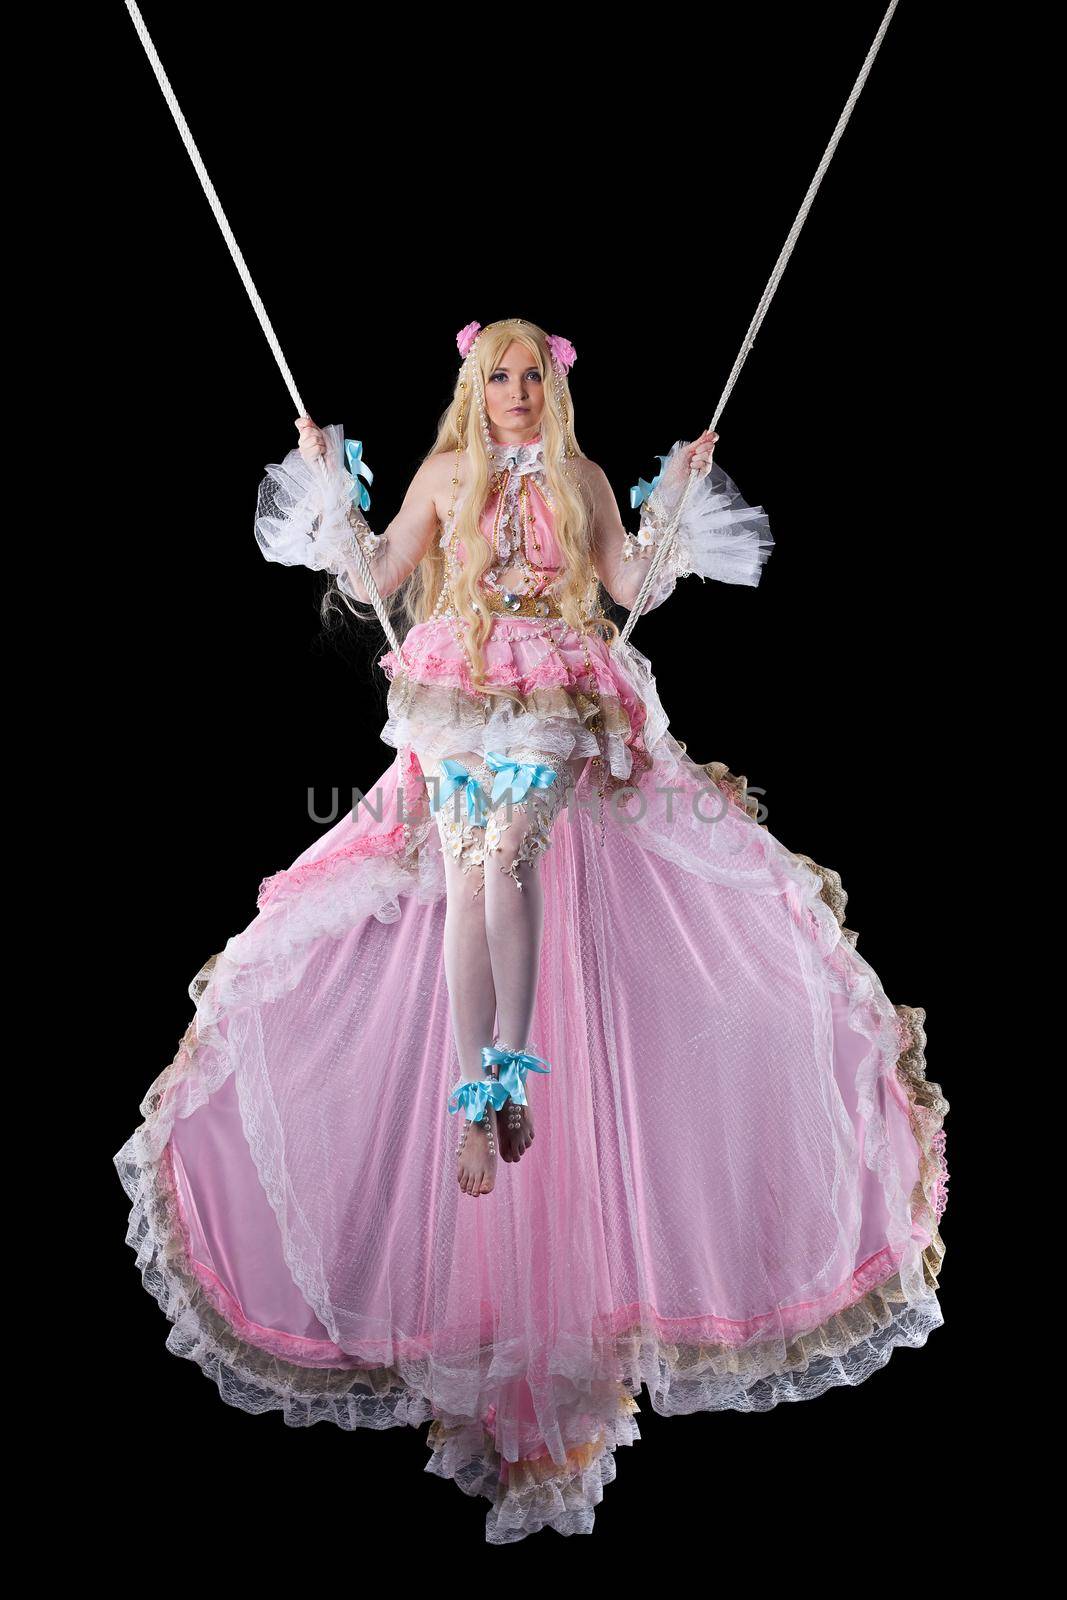 Pretty girl in fary-tale doll costume fly on wire